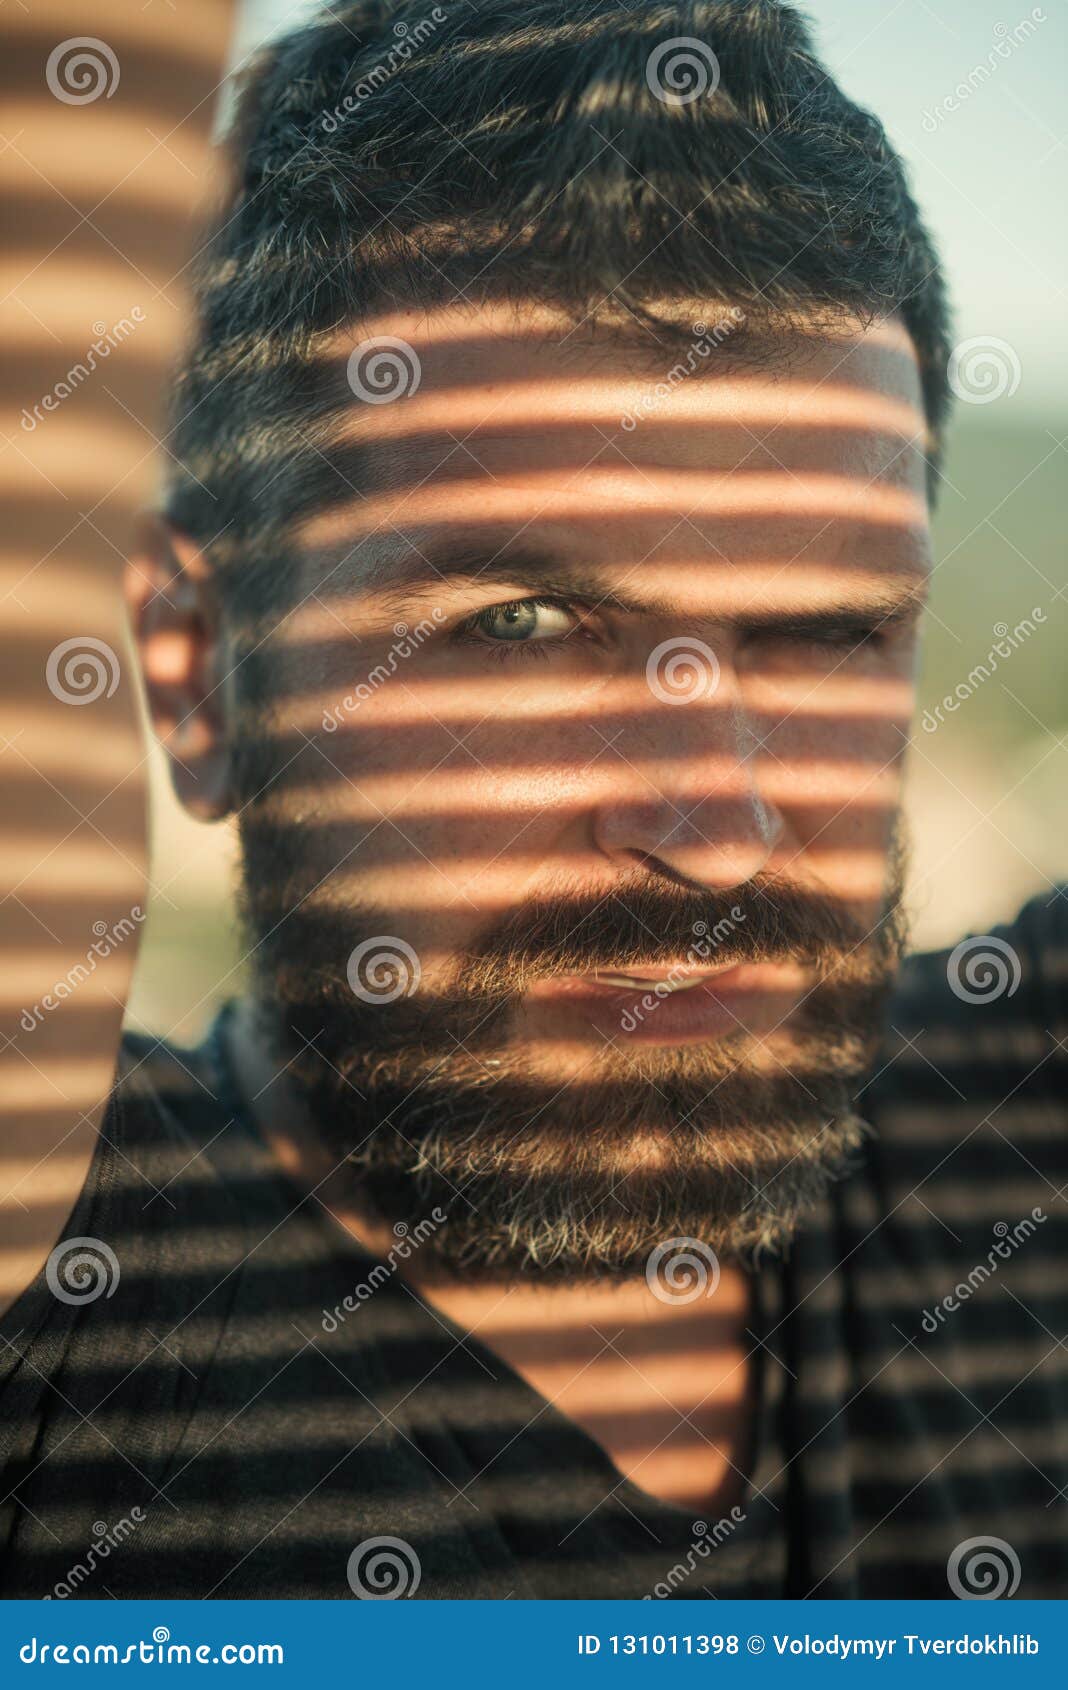 His Haircut and Style Works To Compliment Beard. Man with Beard and  Mustache. Bearded Man with Shadow on Face Stock Photo - Image of groomed,  grooming: 131011398